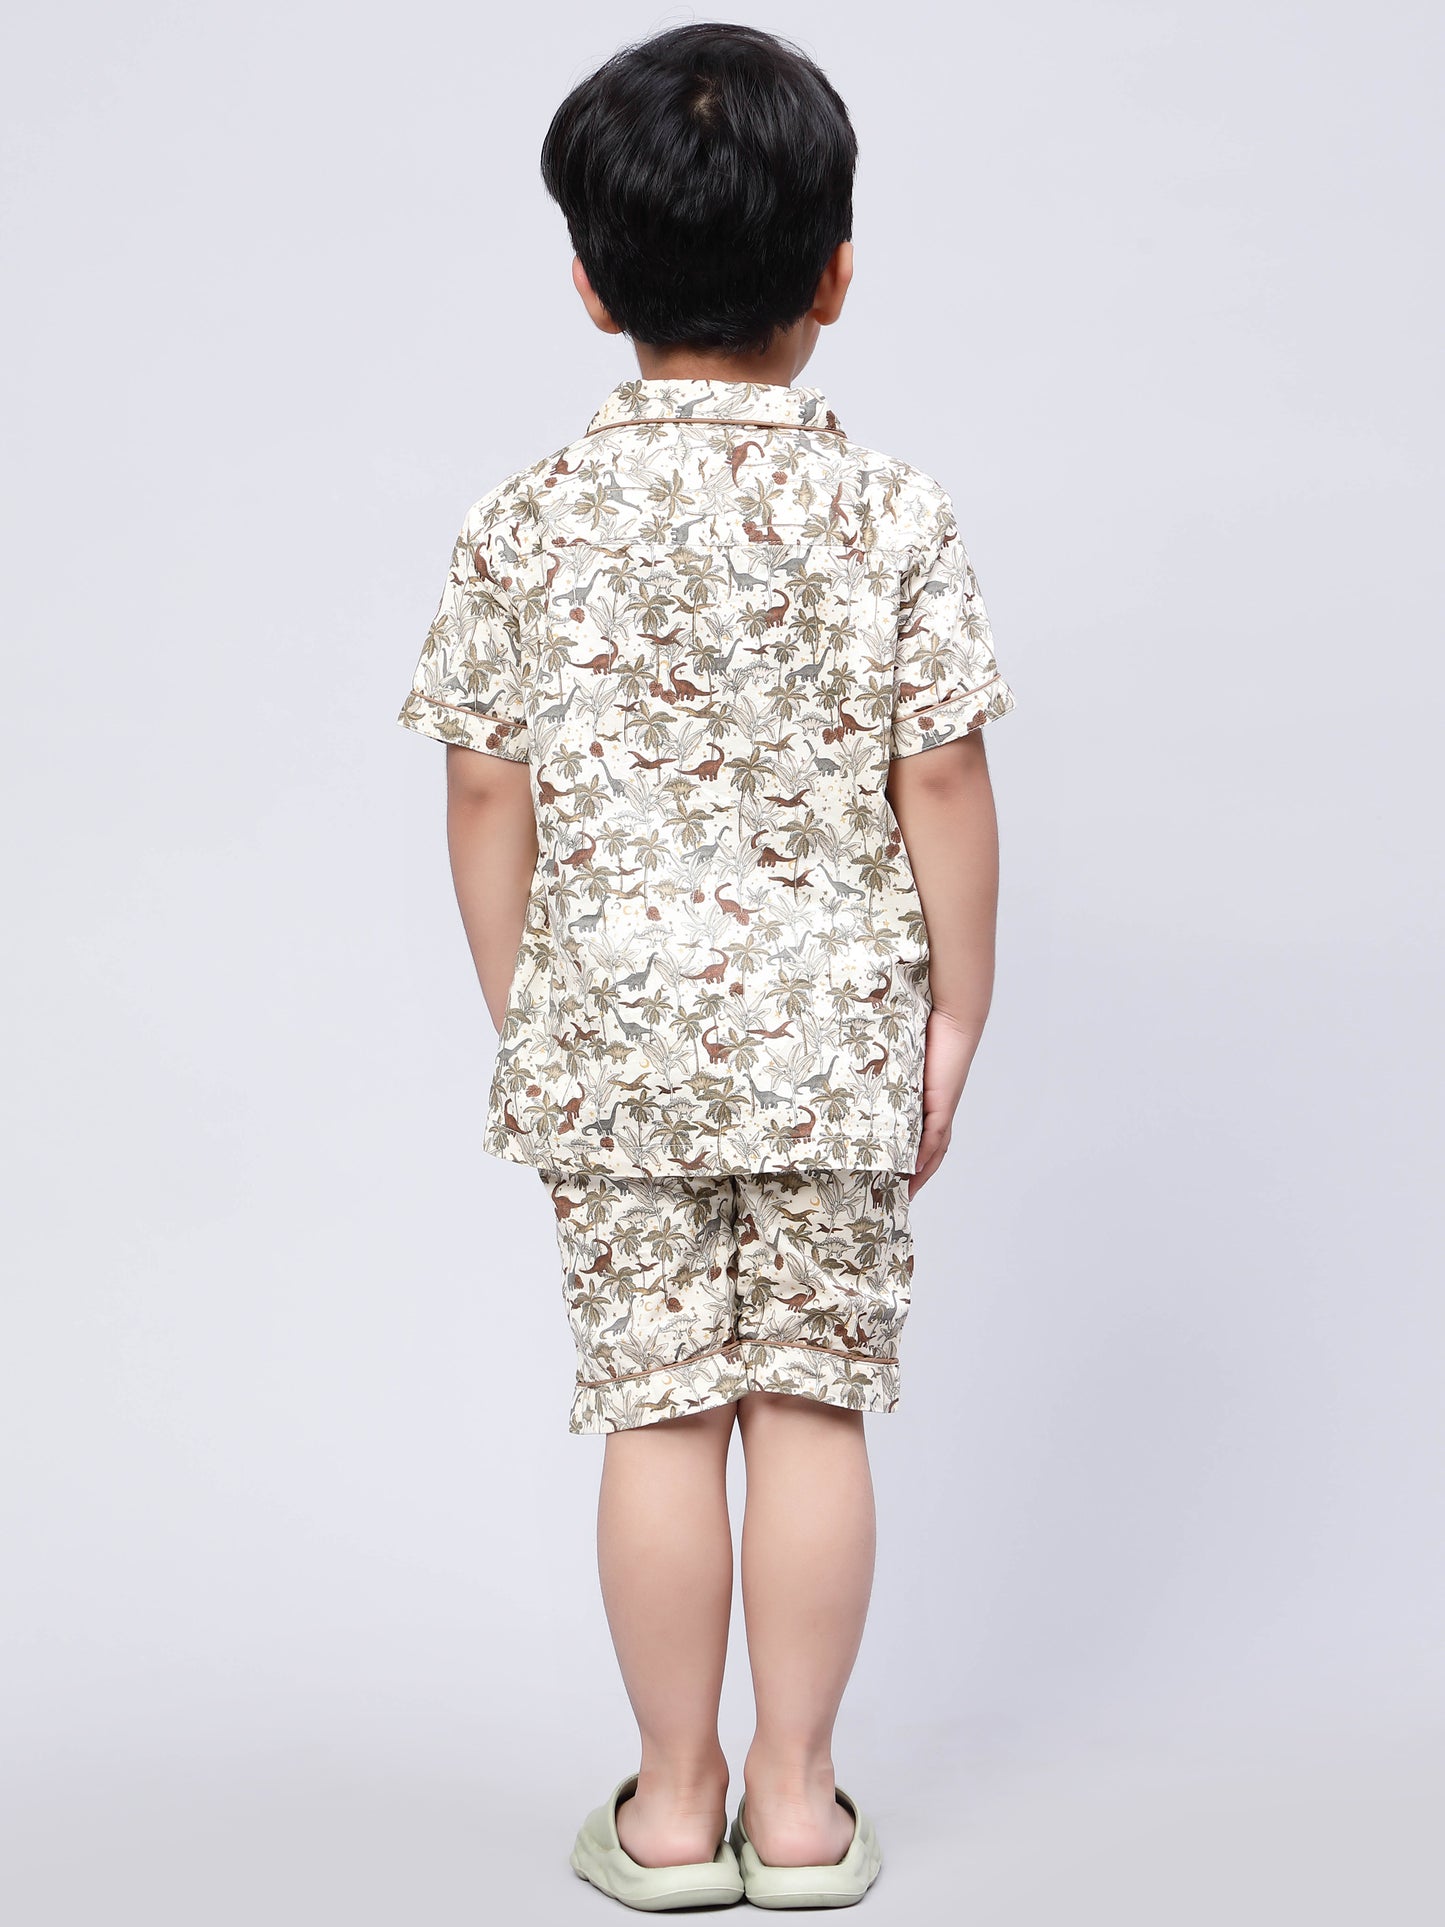 Unisex Dino Print Night suit for Girls or Boys